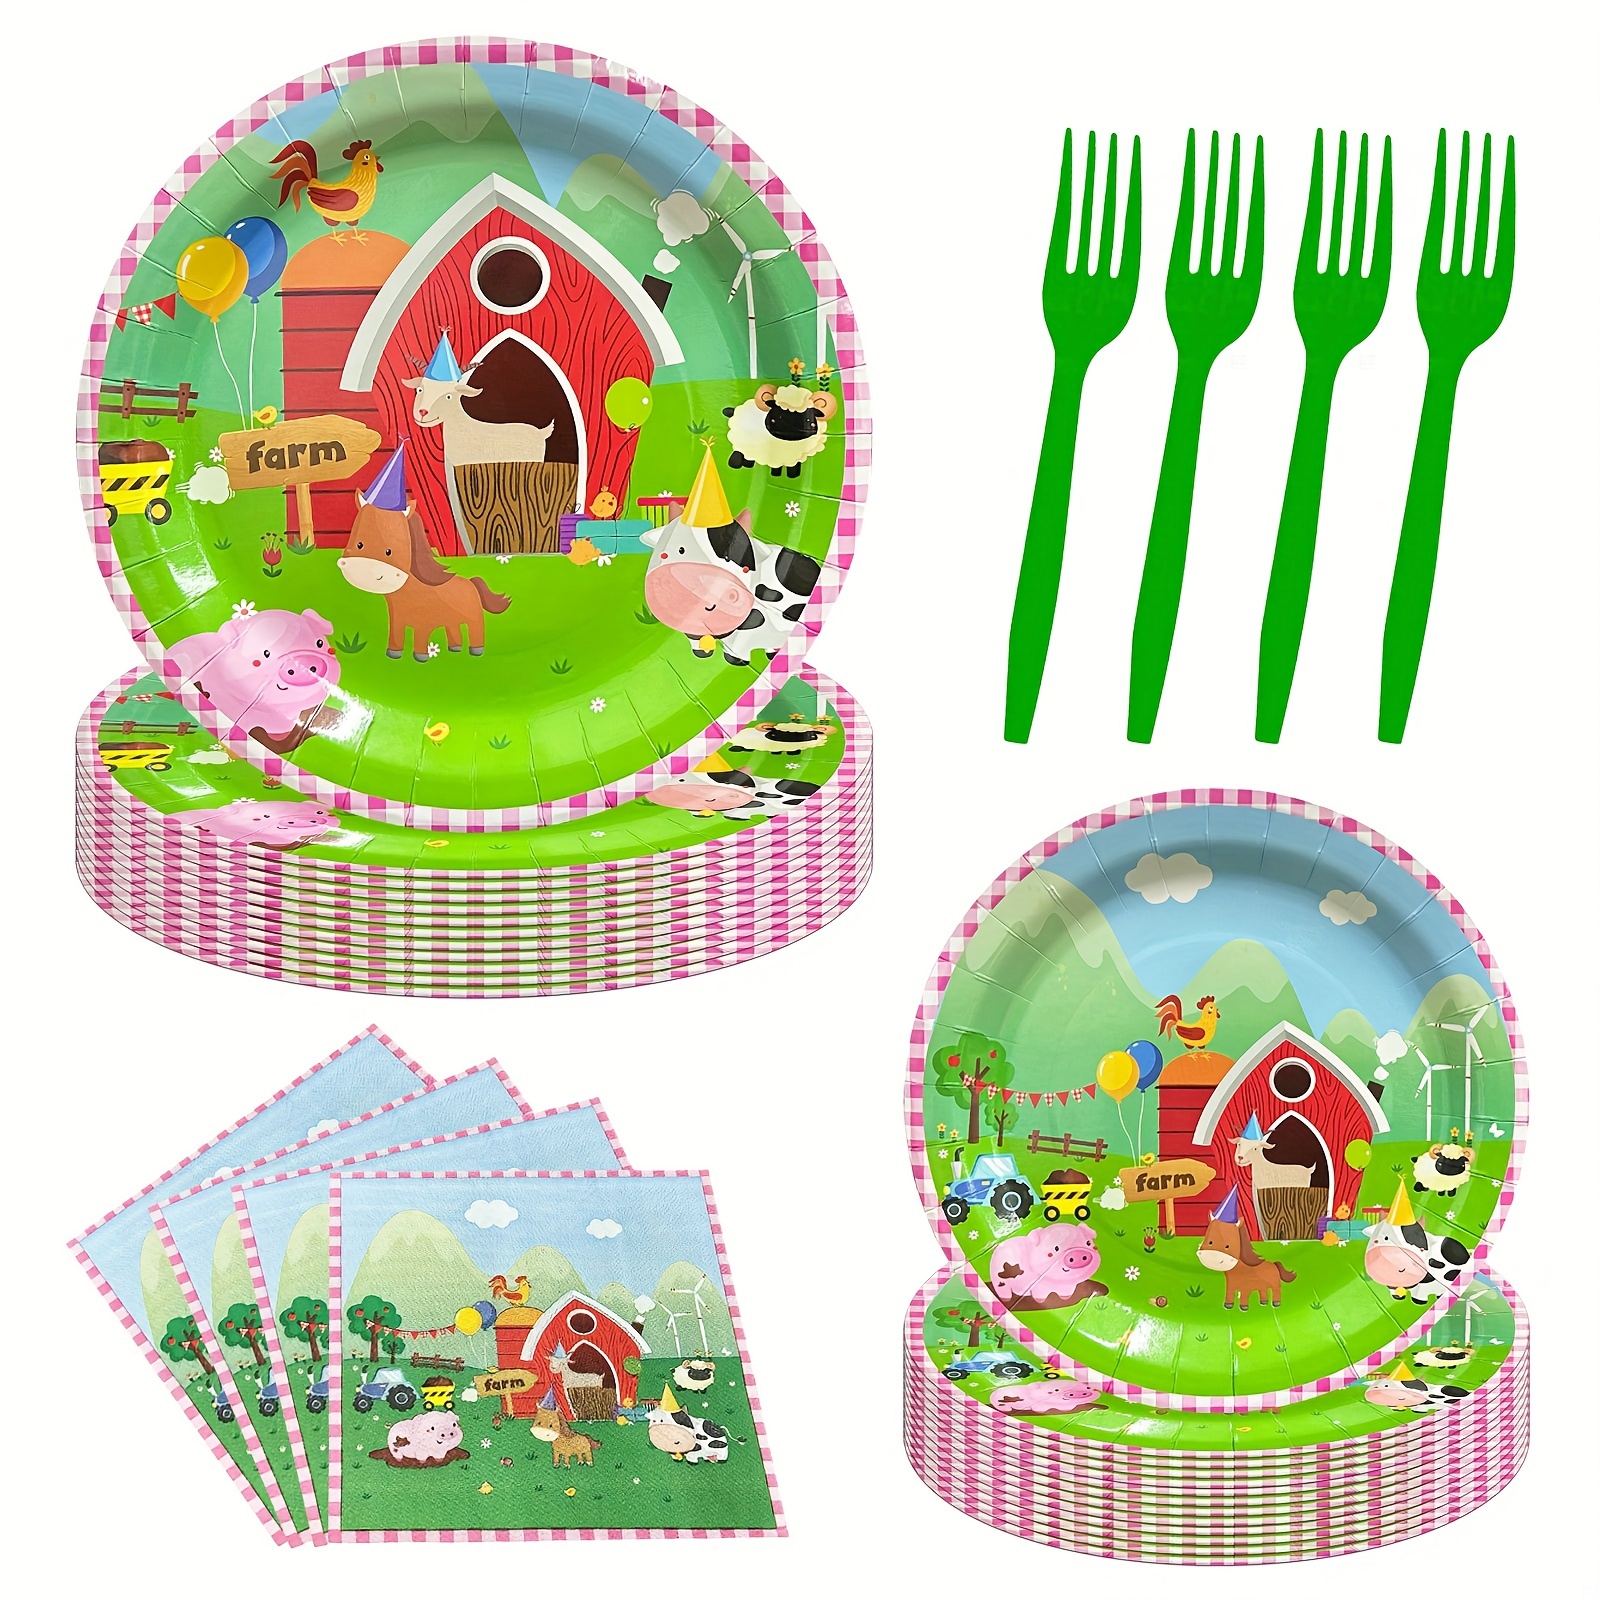  24 Reusable Farm Animal Plastic Straws Chicken Sheep Horse Cow  Pig for Barnyard Farm Birthday Party Supplies Gift Favors with 2 Cleaning  Brushes : Health & Household